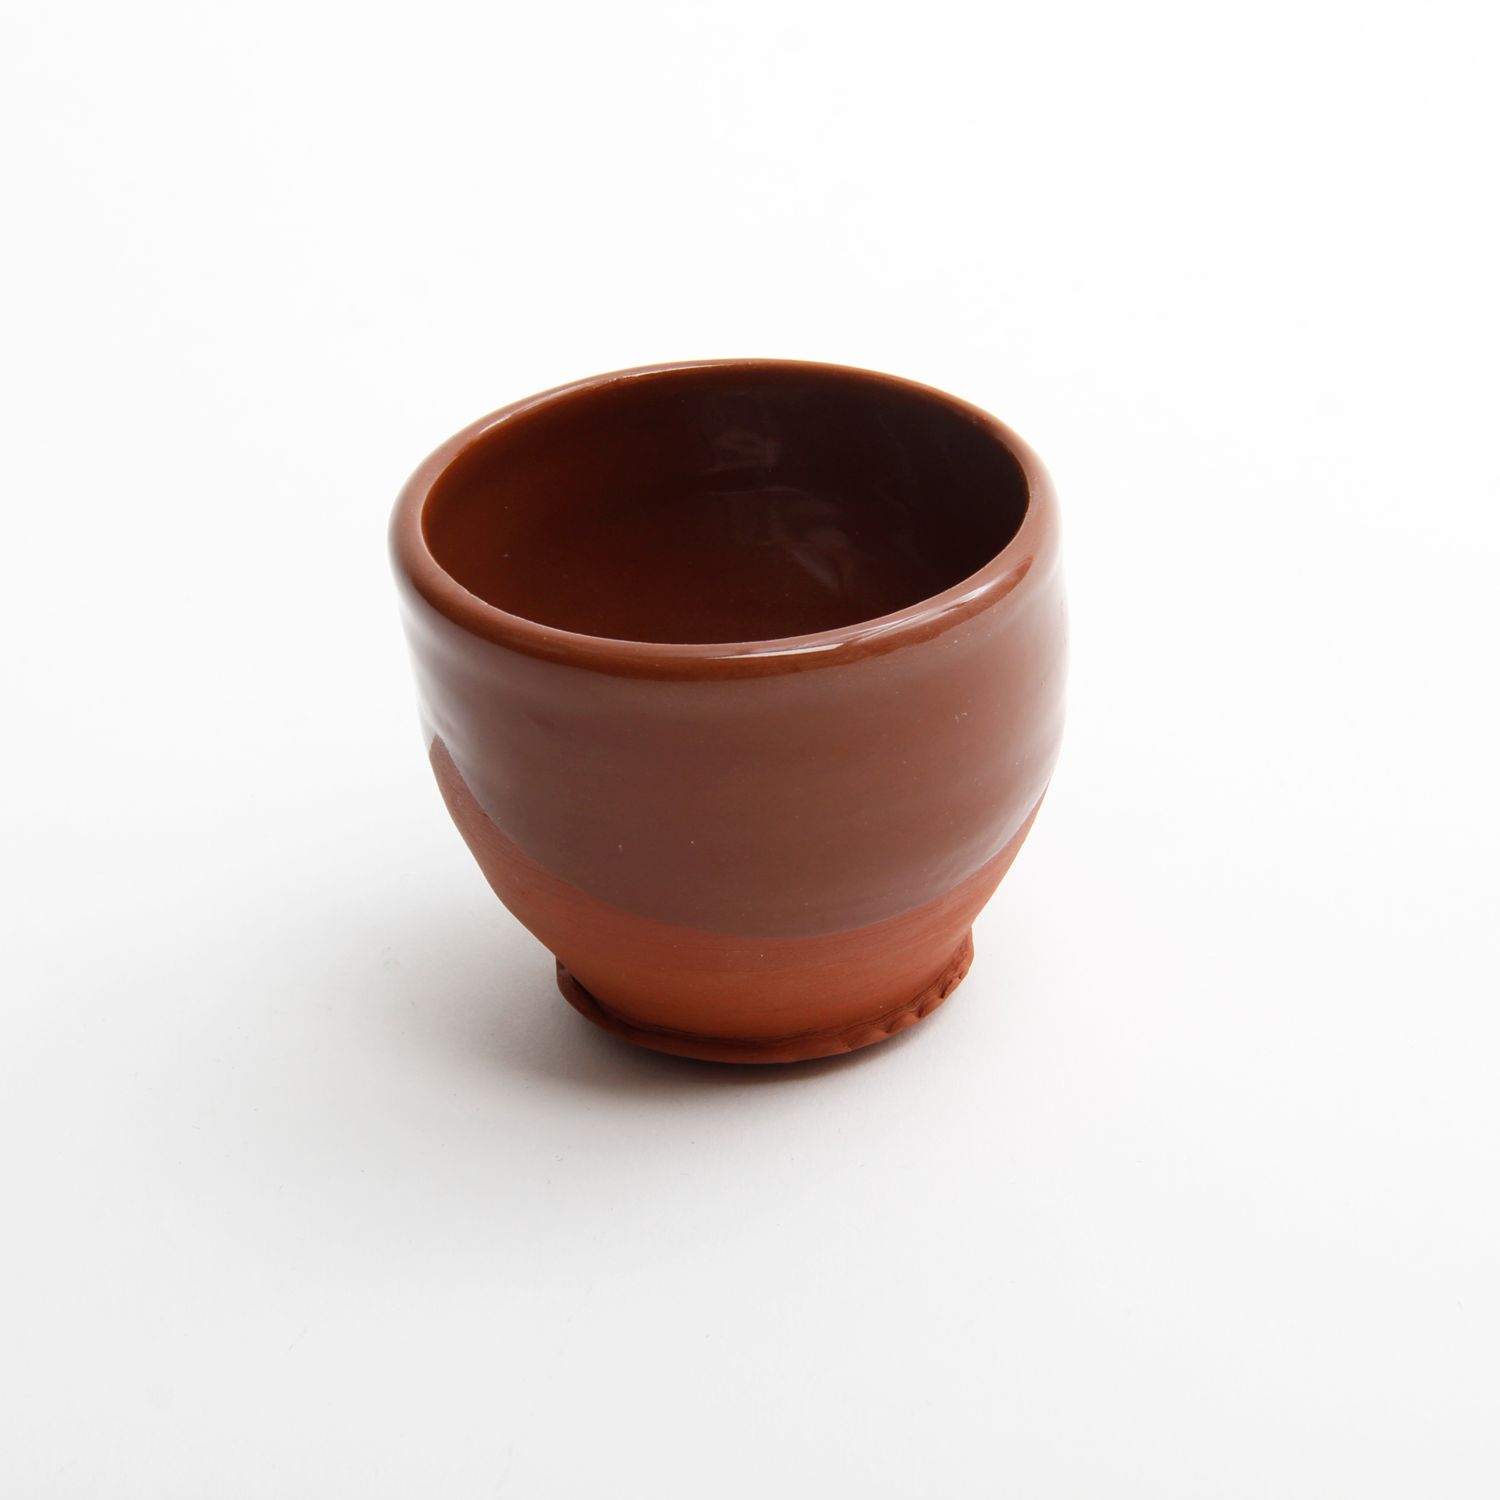 Mary McKenzie: Small Dip Bowl Brown Product Image 1 of 2